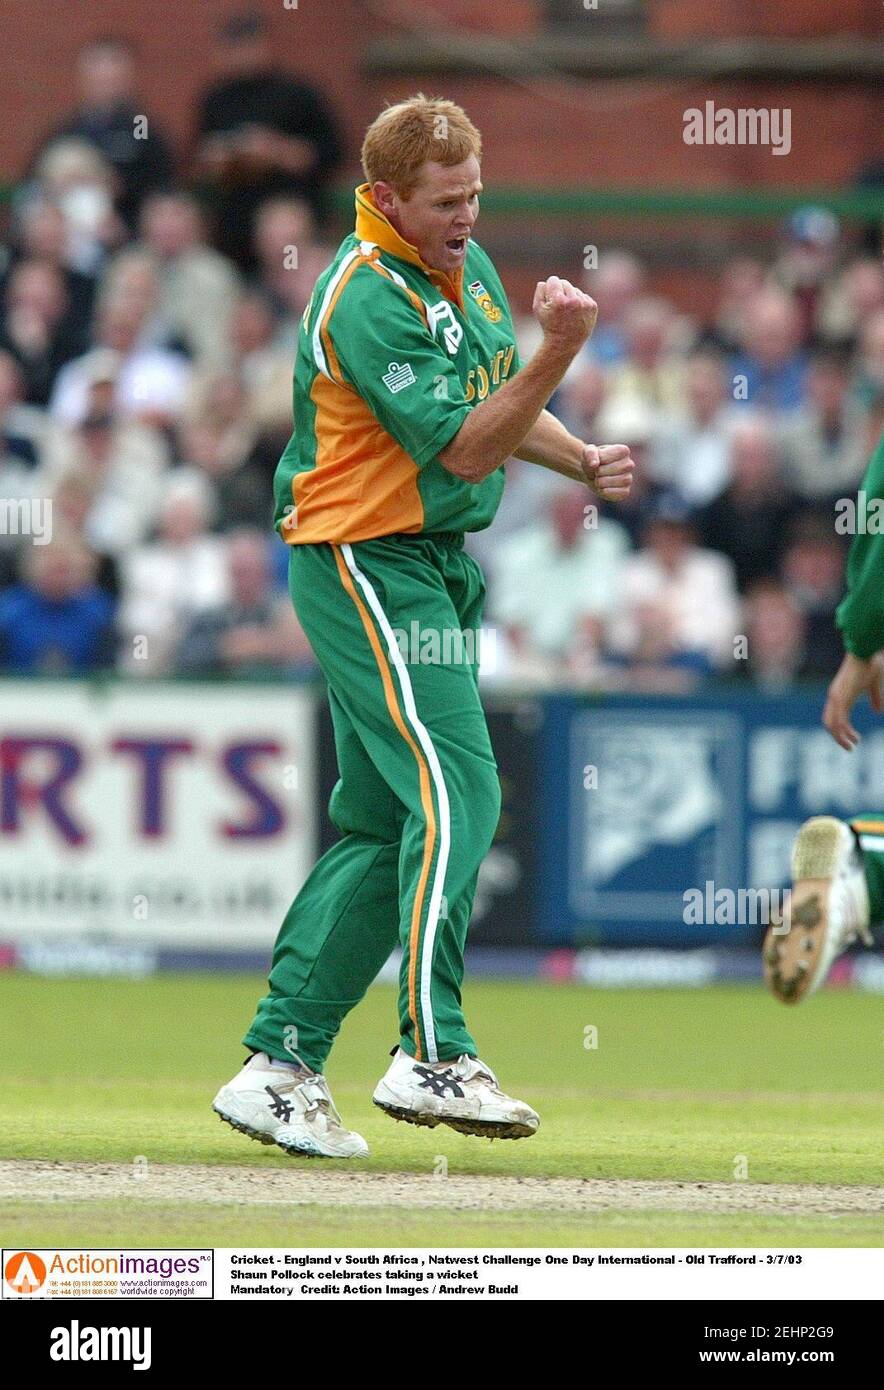 Cricket - England v South Africa , Natwest Challenge One Day International - Old Trafford - 3/7/03  Shaun Pollock celebrates taking a wicket  Mandatory  Credit: Action Images / Andrew Budd Stock Photo